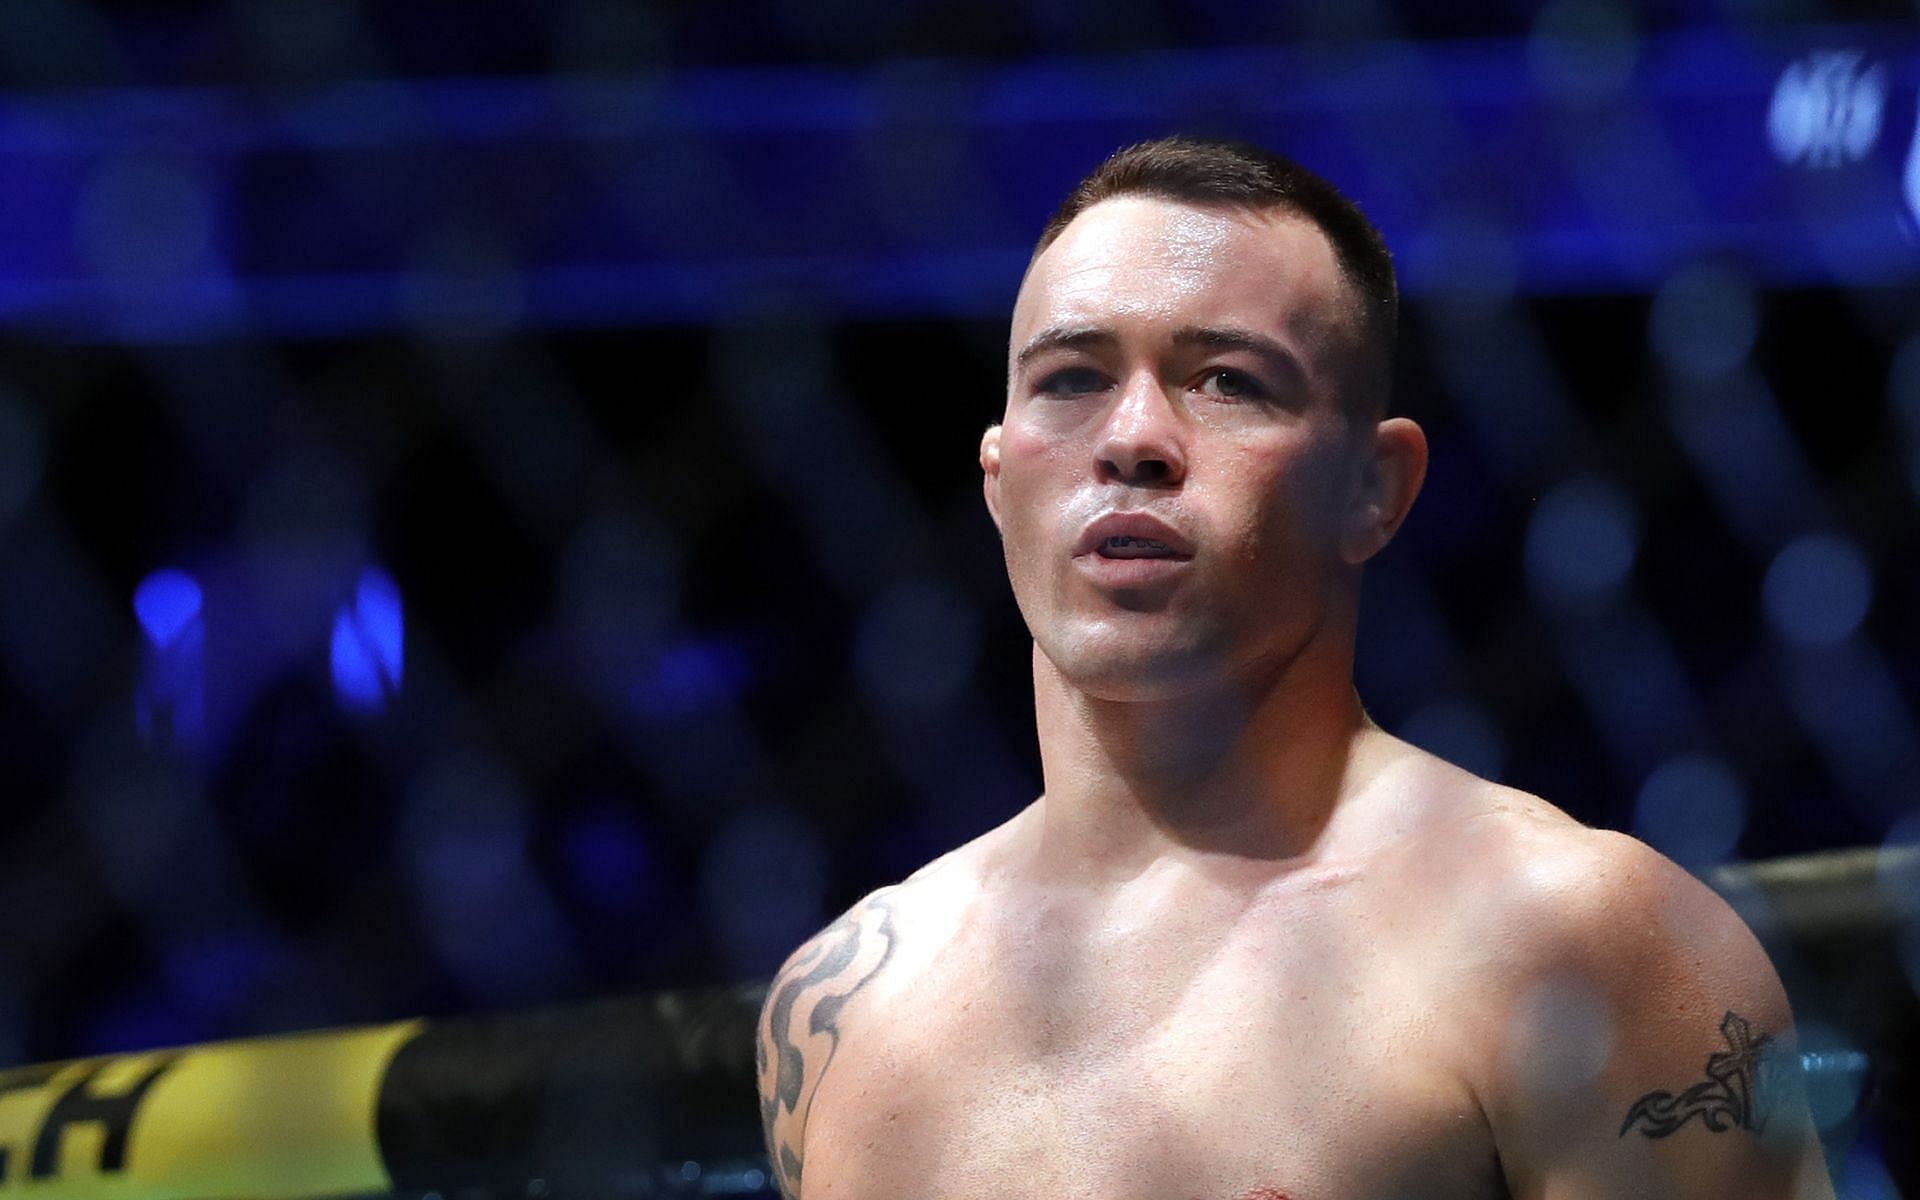 Colby Covington prepares for his fight against UFC welterweight champion Kamaru Usman during UFC 245